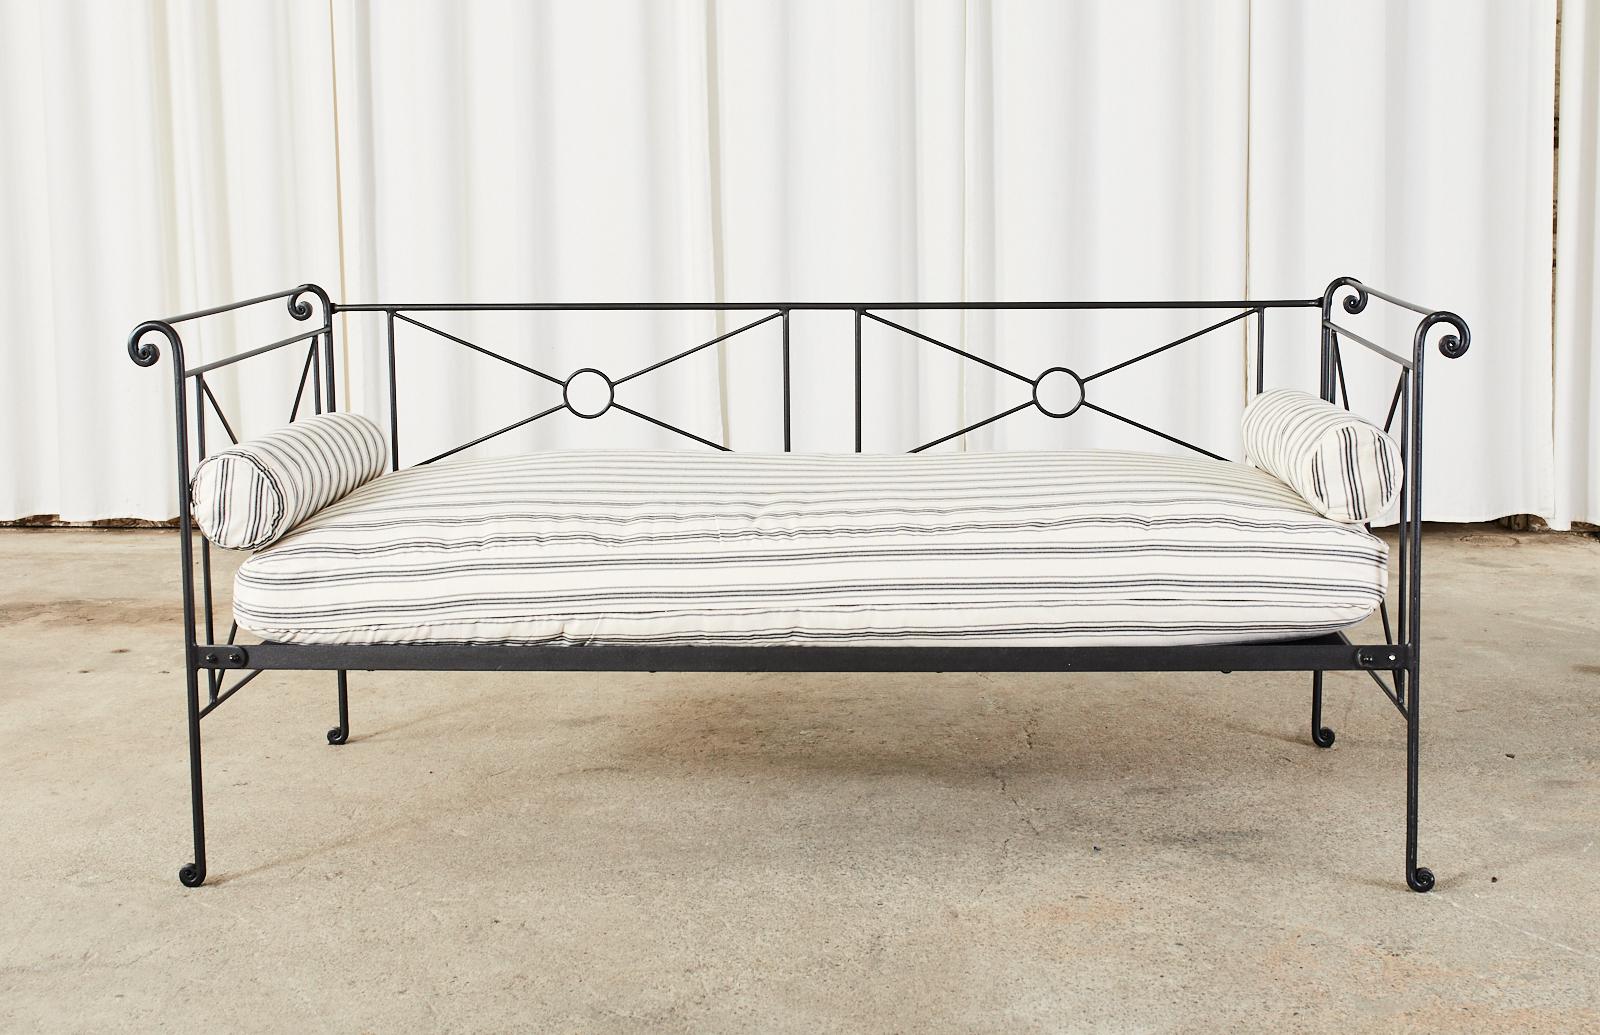 Stylish iron daybed made by Charles P. Rogers crafted in the campaign style with X form neoclassical motifs. The iron frame has scrolled decorative ends on top and bottom. The seat measures 15 inches high without the cushion. Newly upholstered pad